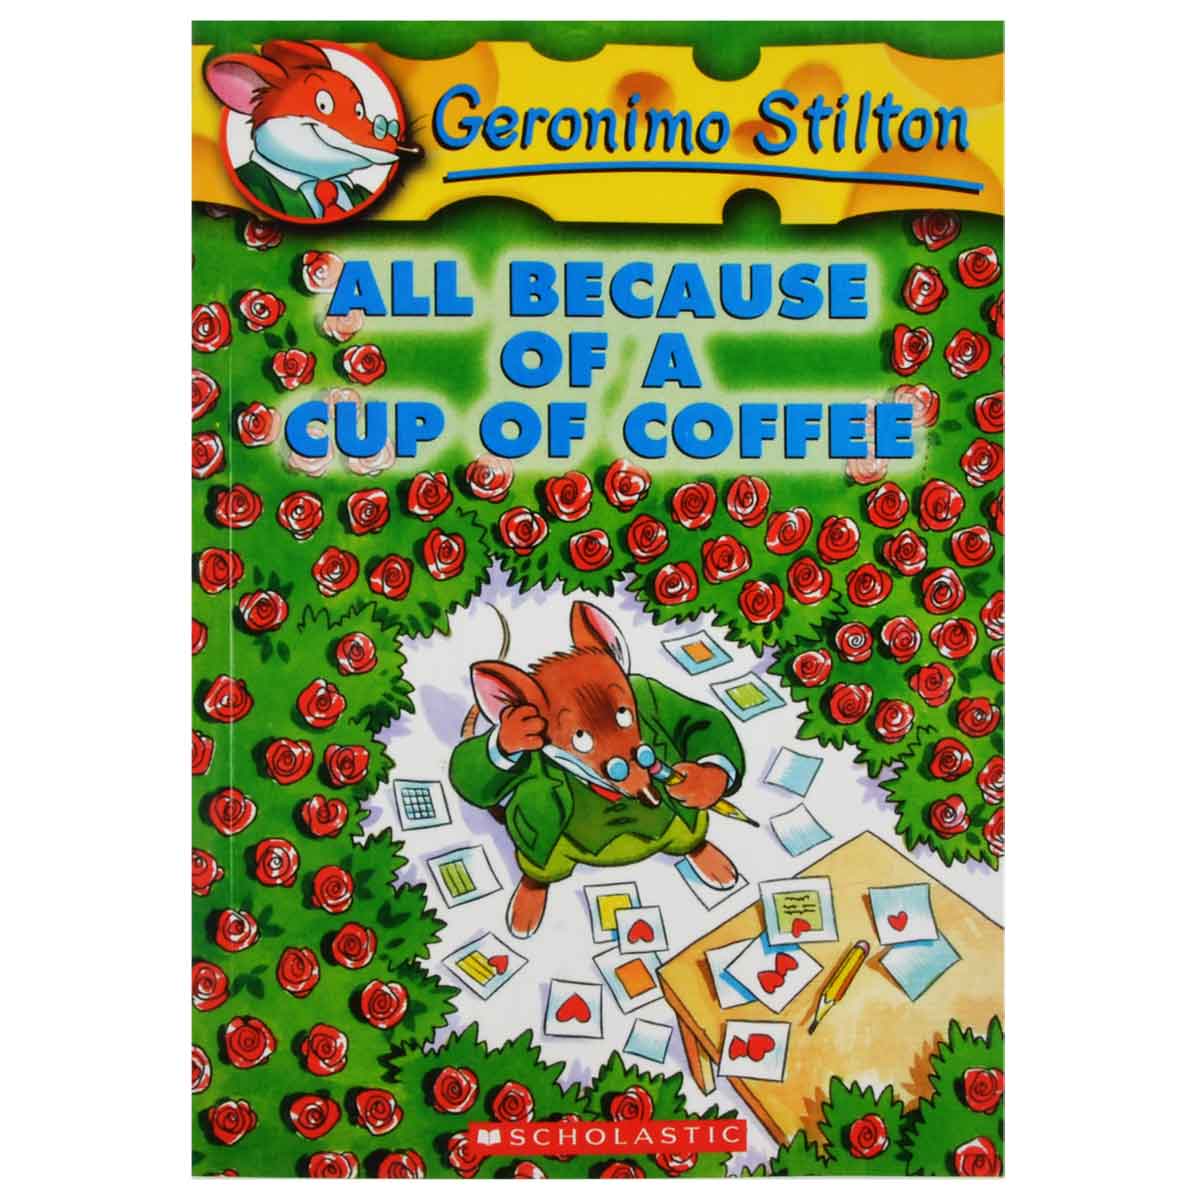 Geronimo Stilton All Because Of A Cup Of Coffee